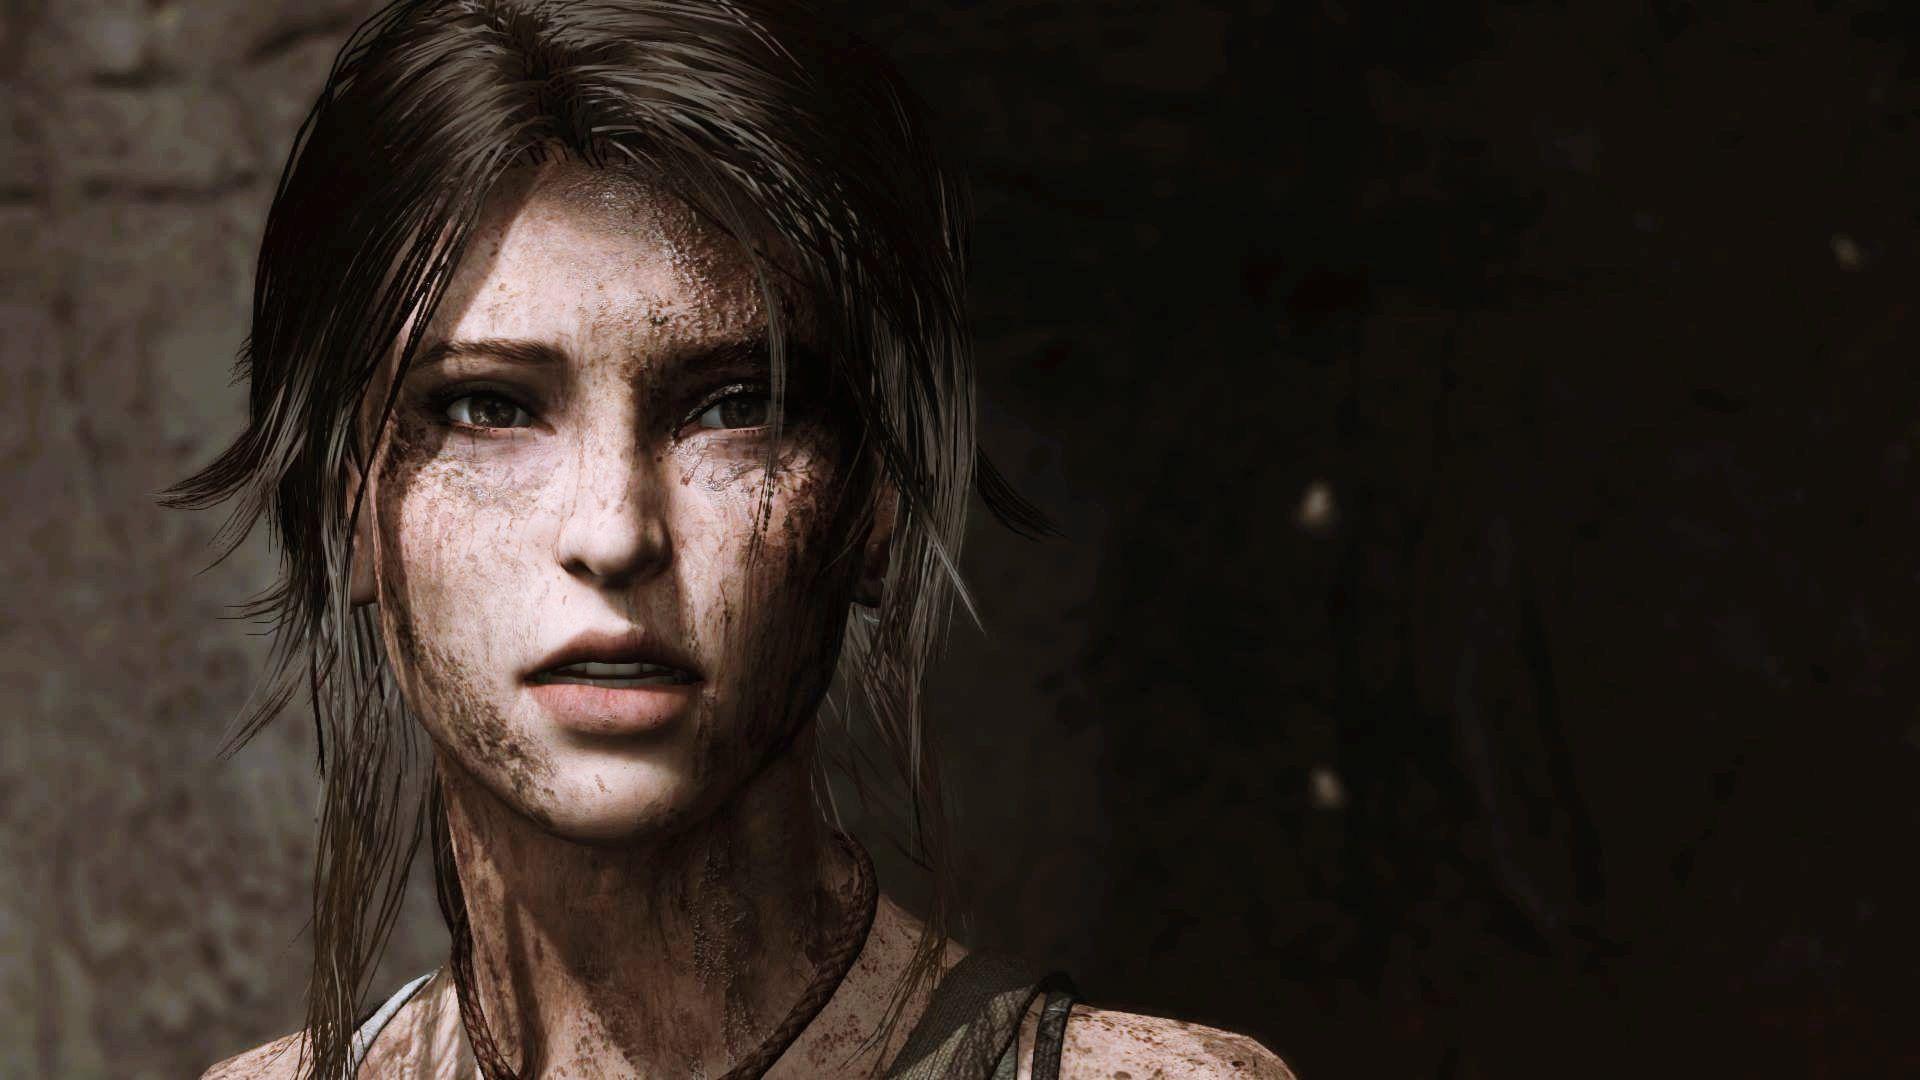 Best of 2015: Most Anticipated Video Games of 2015